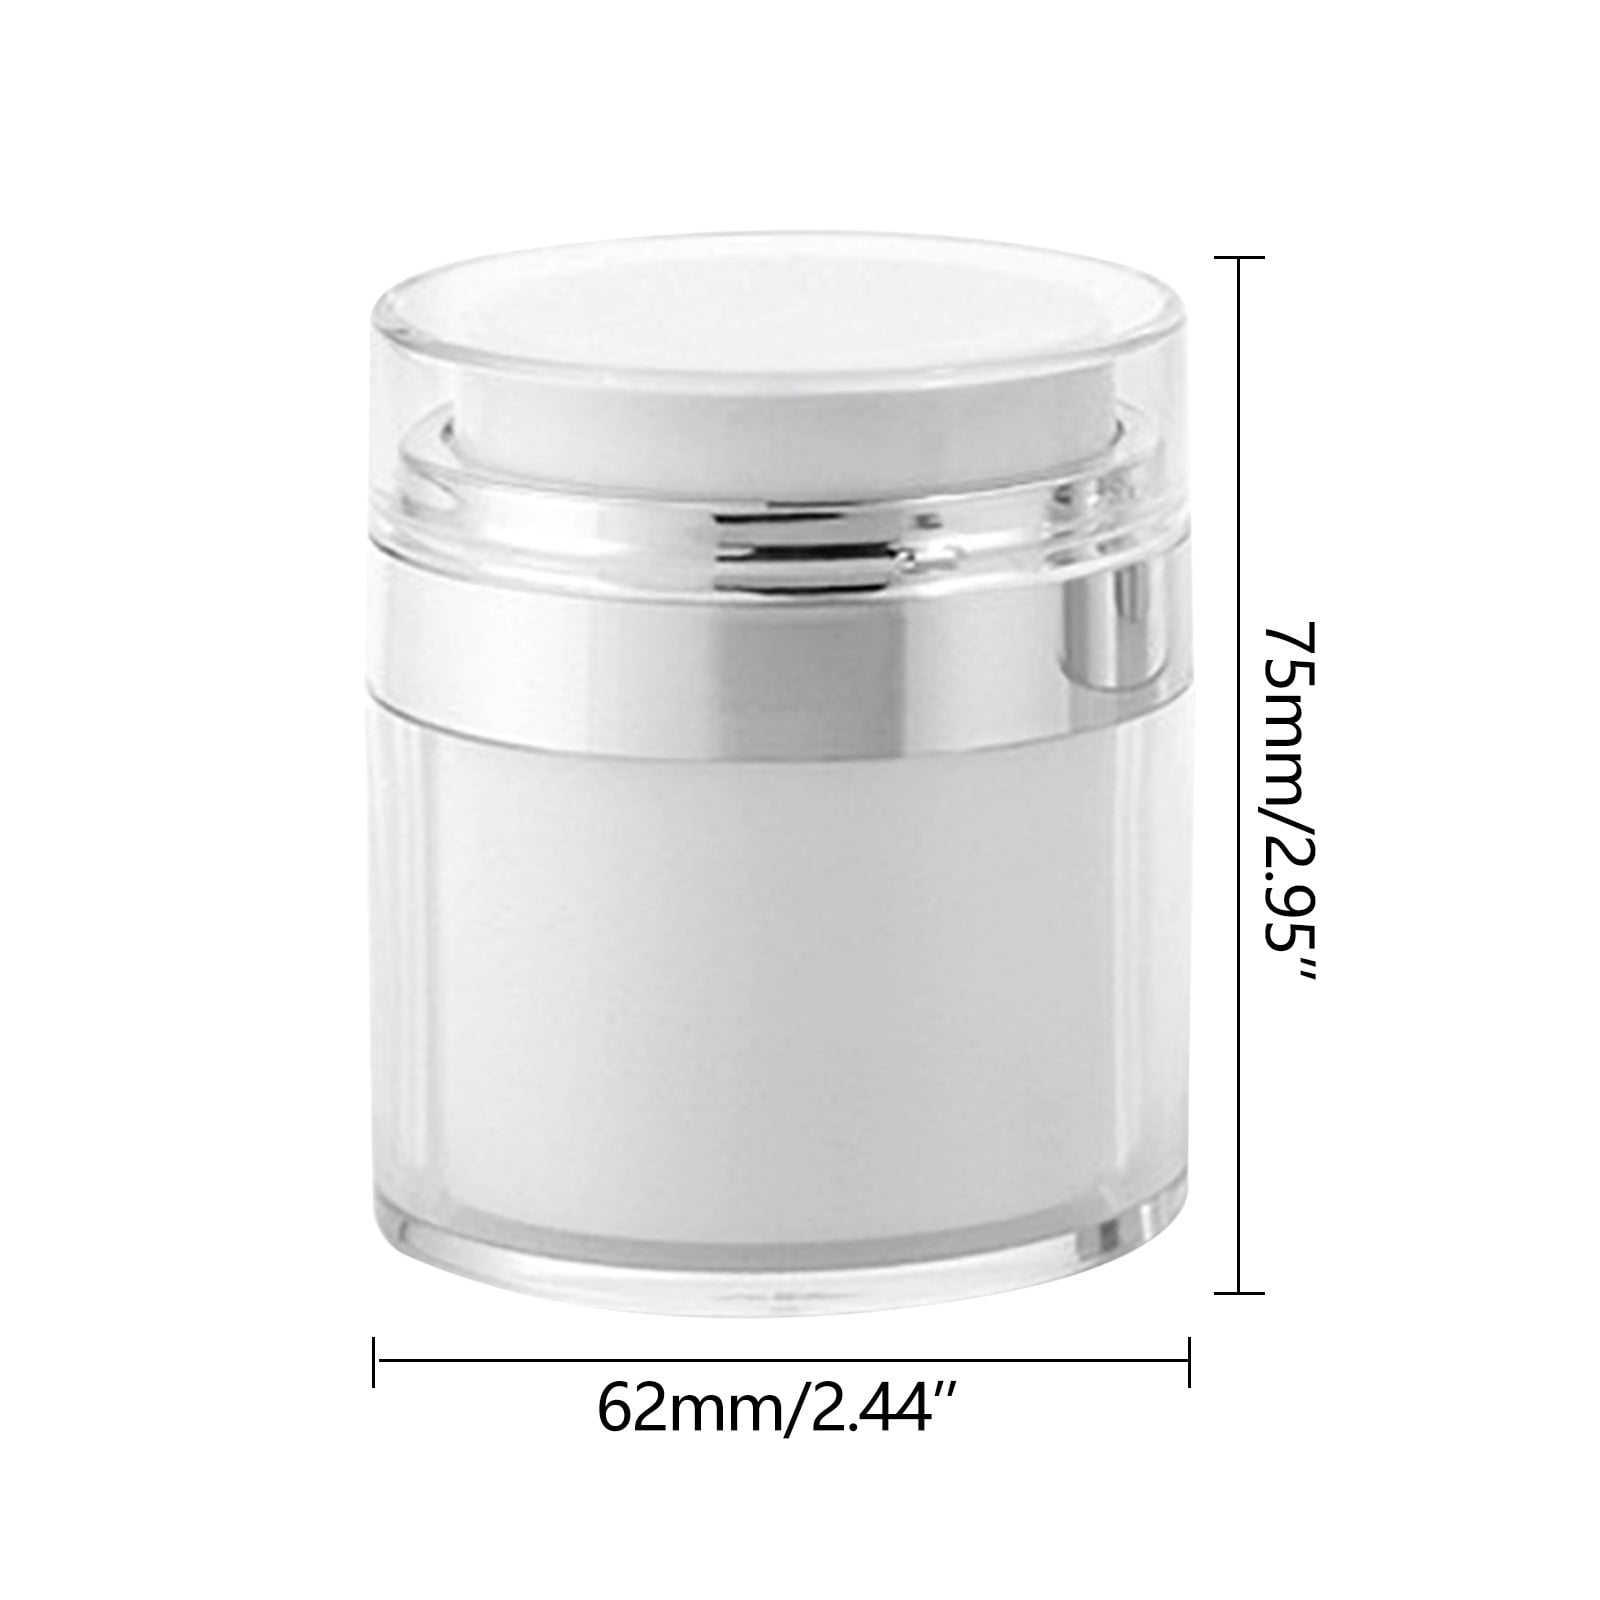 OAVQHLG3B Refillable Cosmetic Containers,Airless Pump Jars,Empty Acrylic  Makeup Cosmetic Jar Containers with Pump,Travel Lotion Jar With Lid for  Thick Moisturizer, Cream